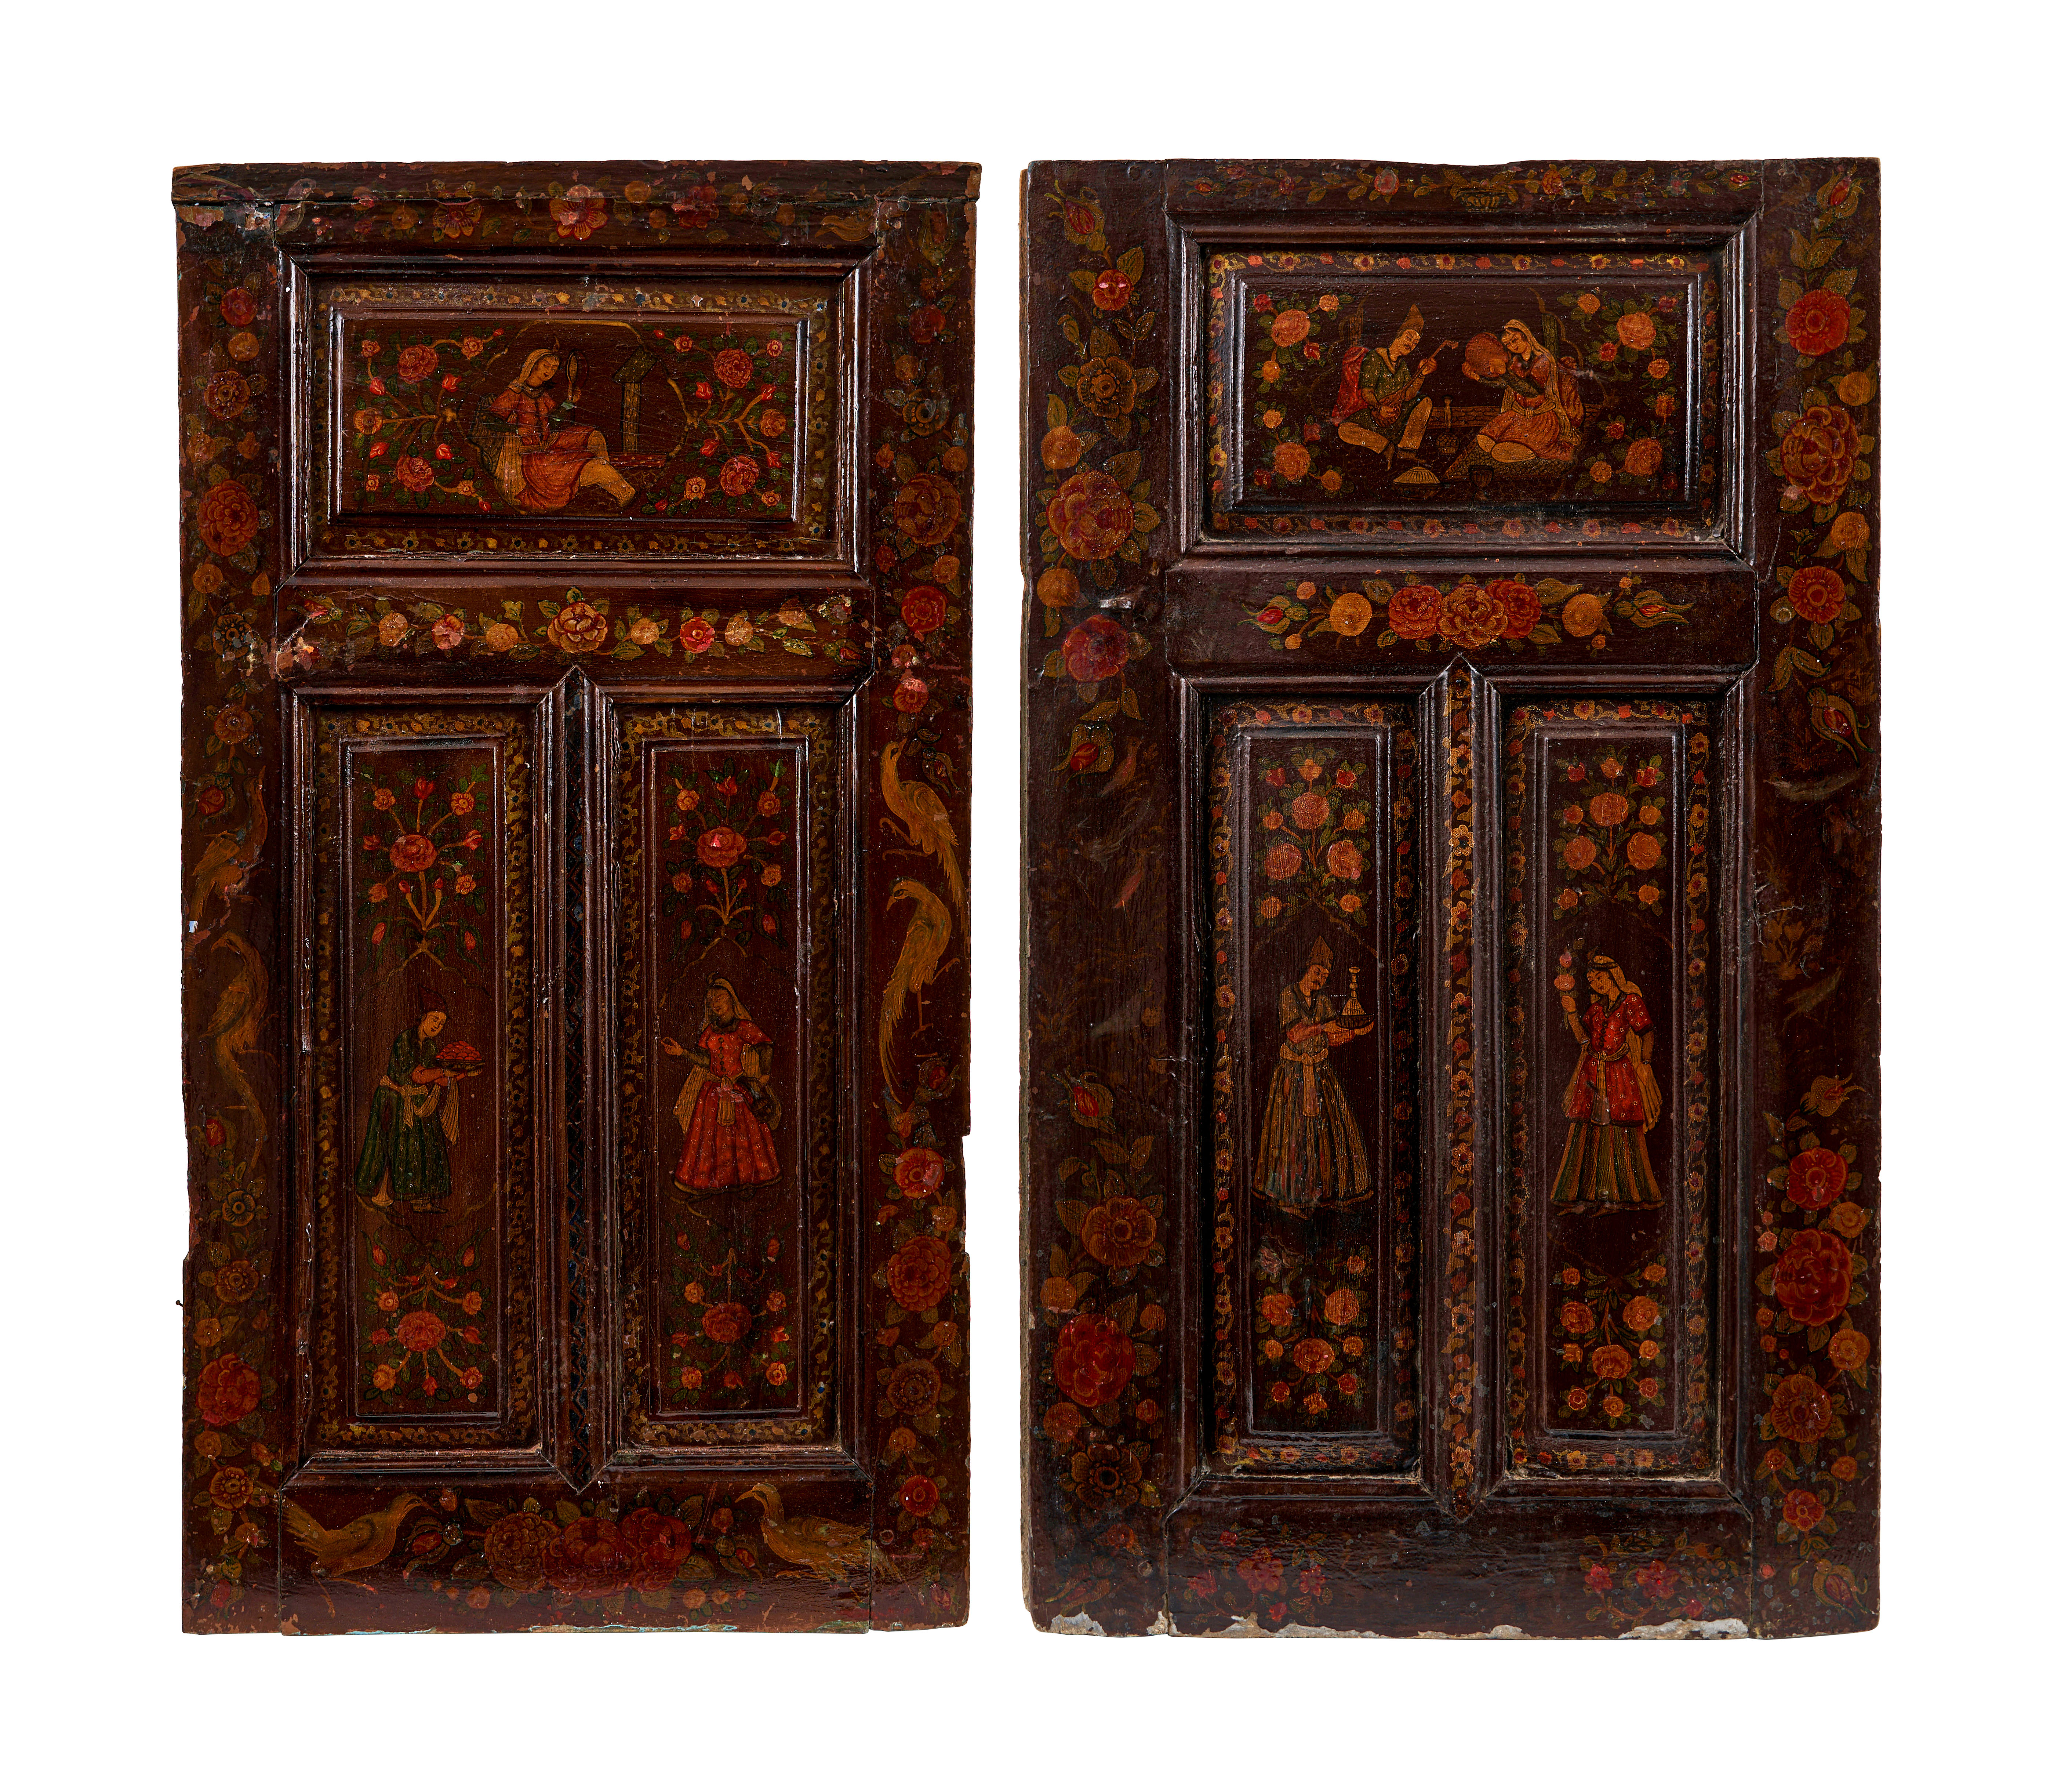 A PAIR OF QAJAR PAINTED AND GESSO APPLIED WOODEN DOORS, 19TH CENTURY, PERSIA